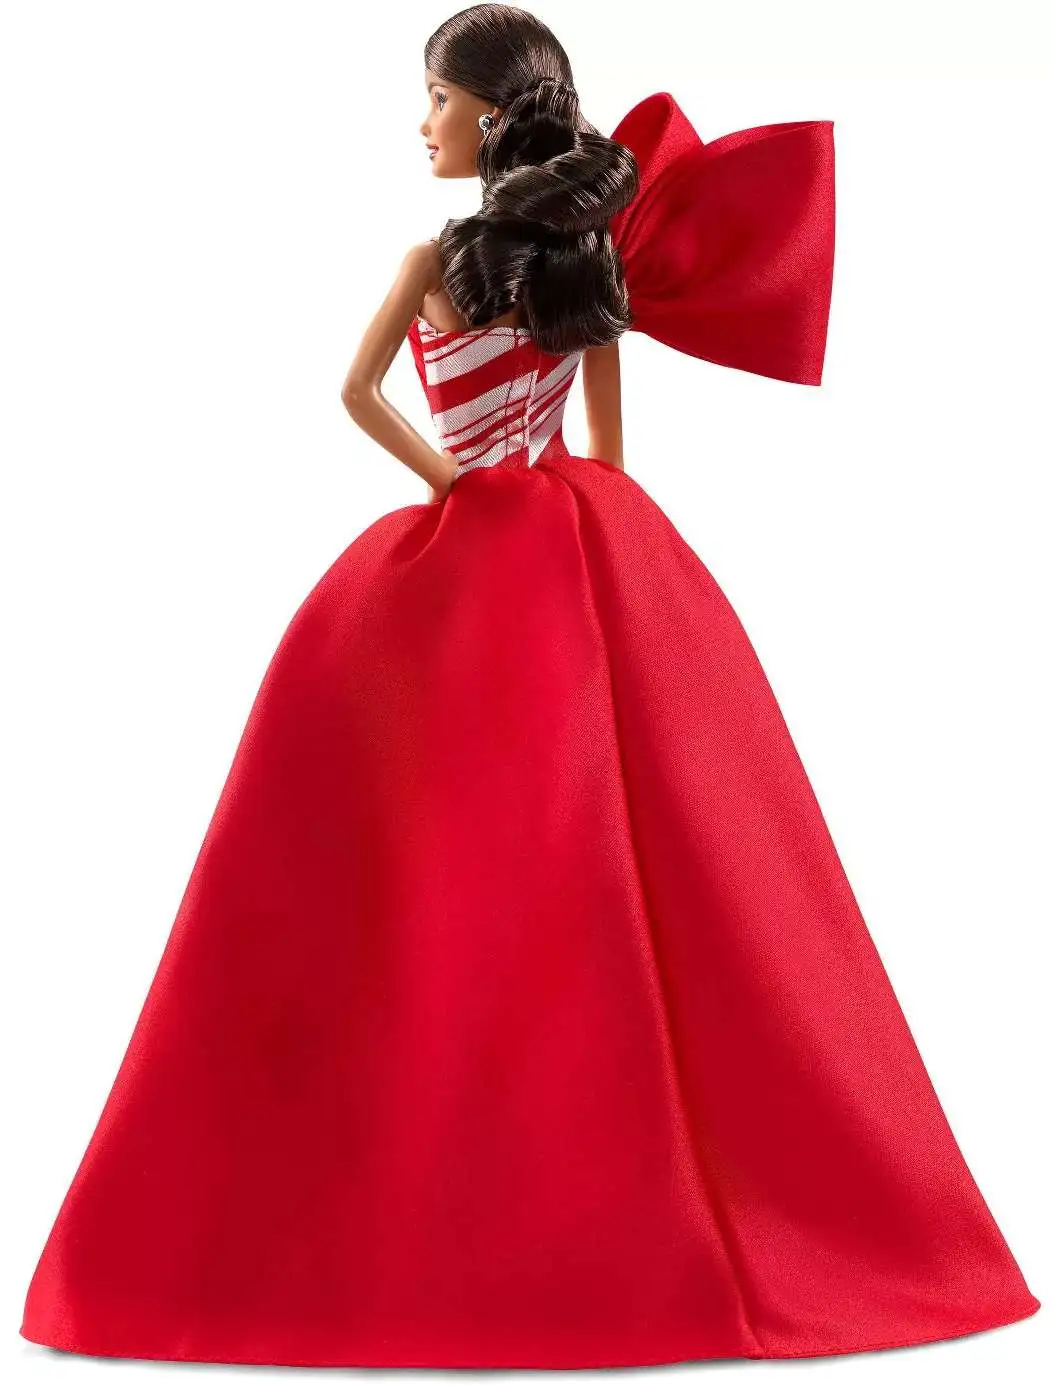 Barbie 2019 Holiday Doll Brunette Side Ponytail with Red & White Gown 